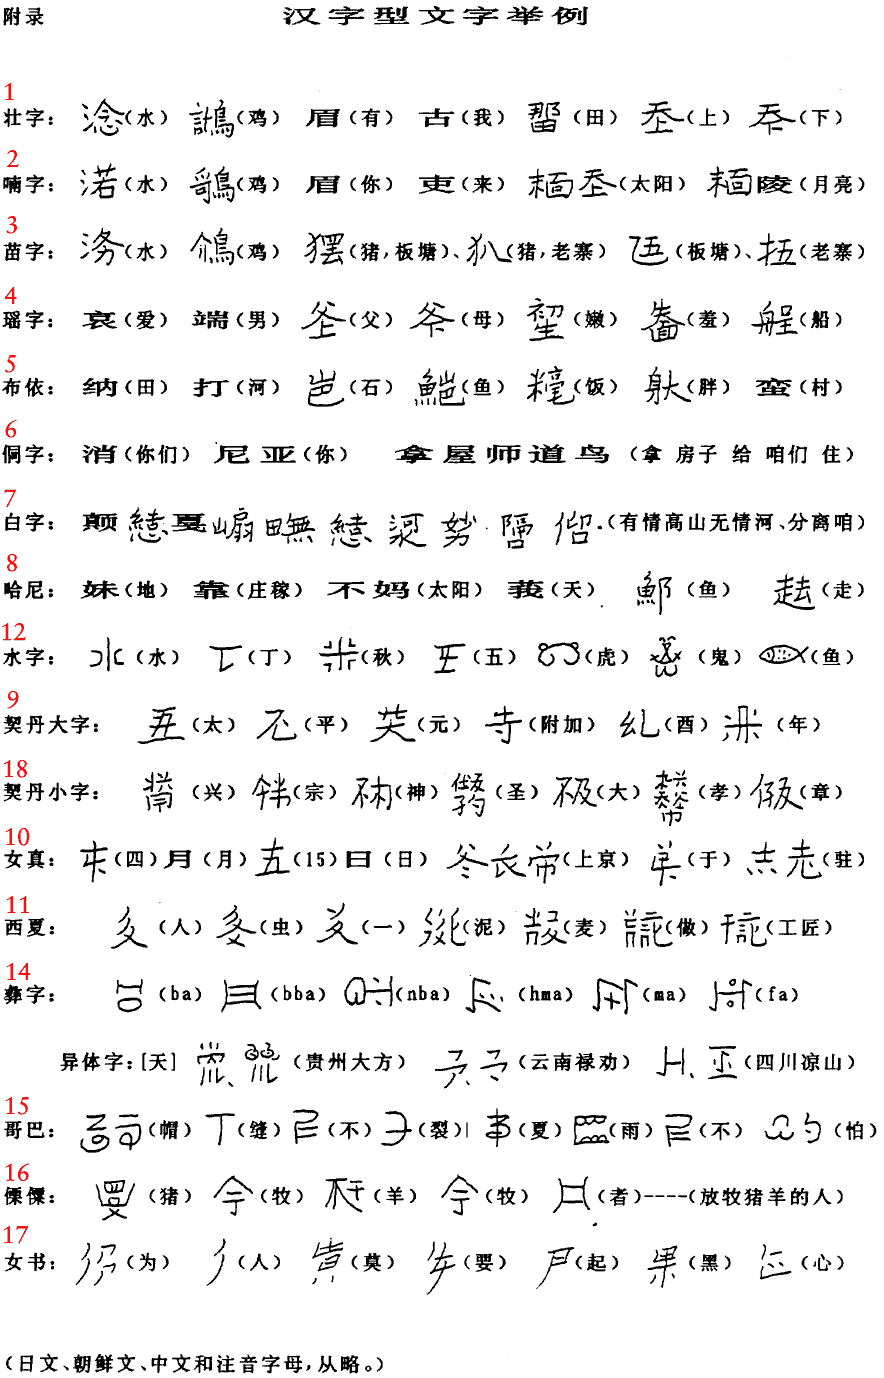 What are the symbols in the Chinese alphabet?